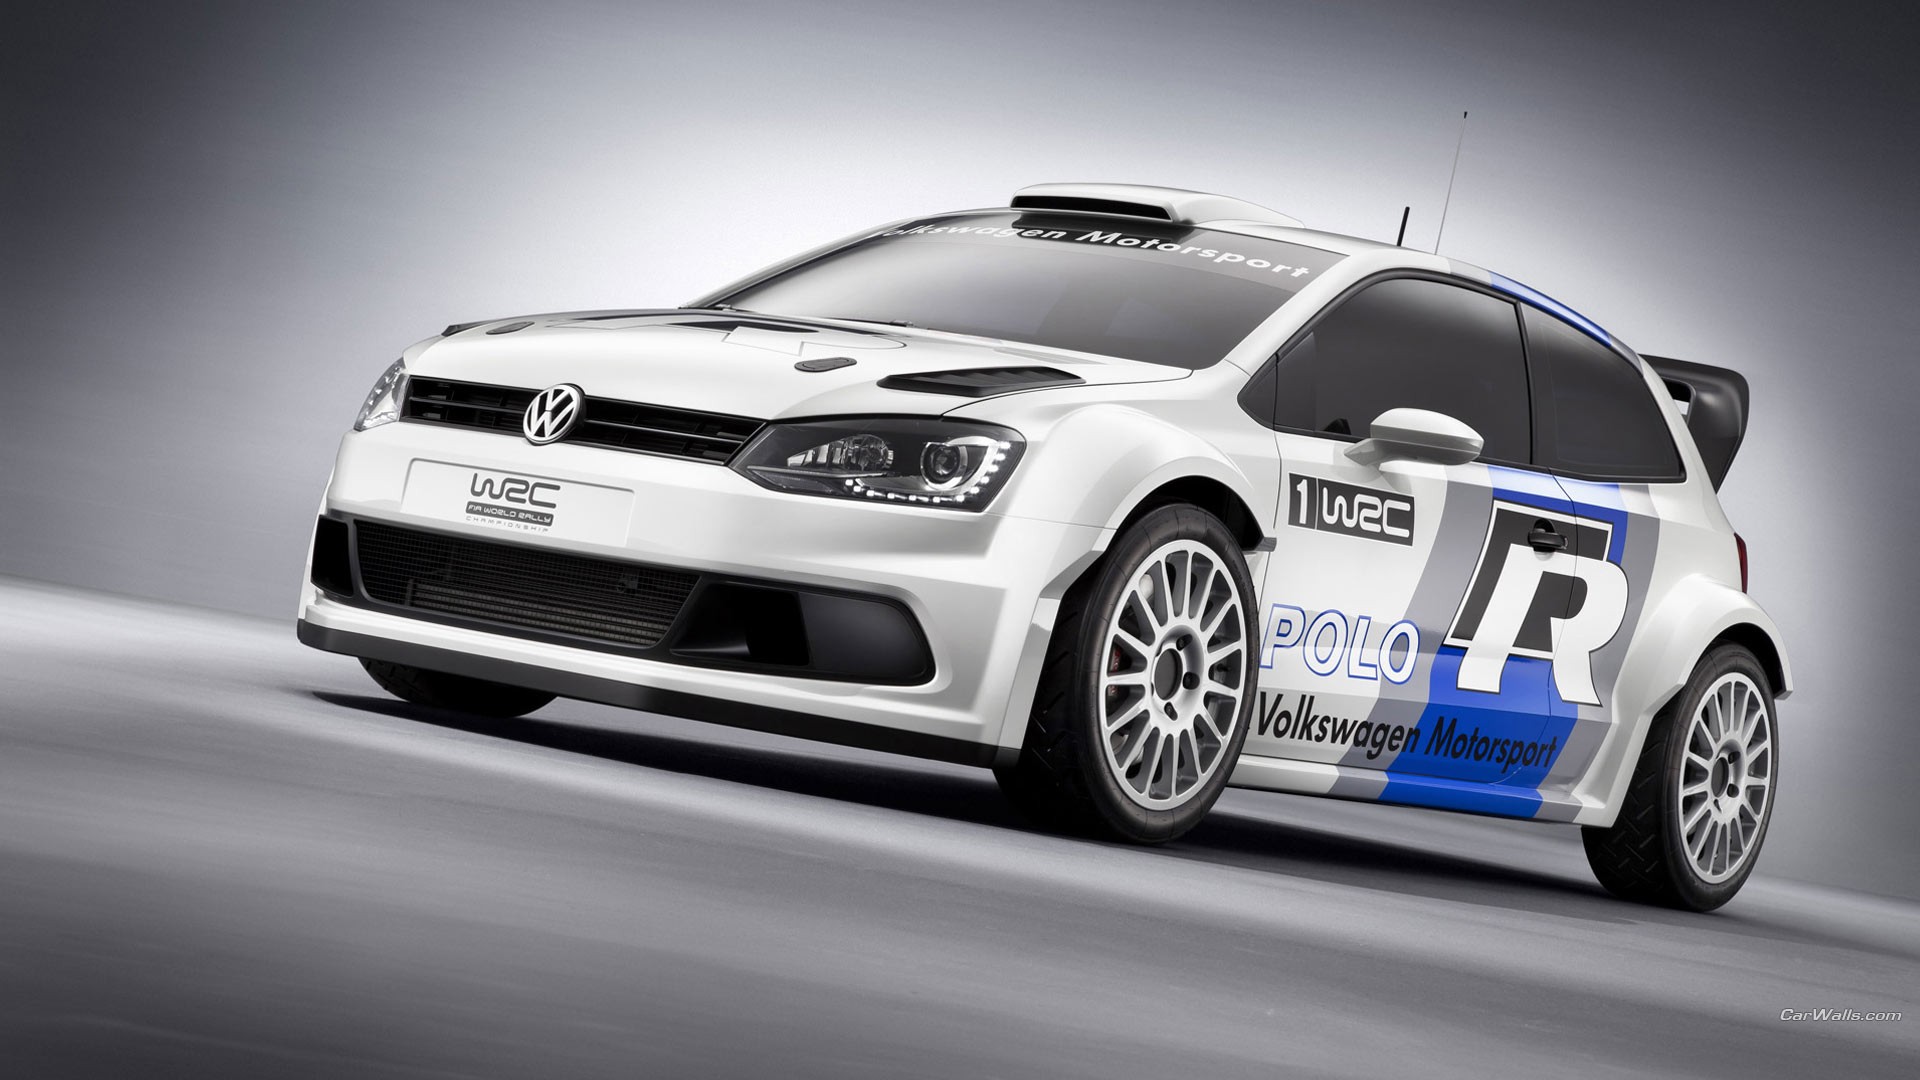 General 1920x1080 car Volkswagen VW Polo WRC rally cars Volkswagen Polo gradient simple background white cars vehicle